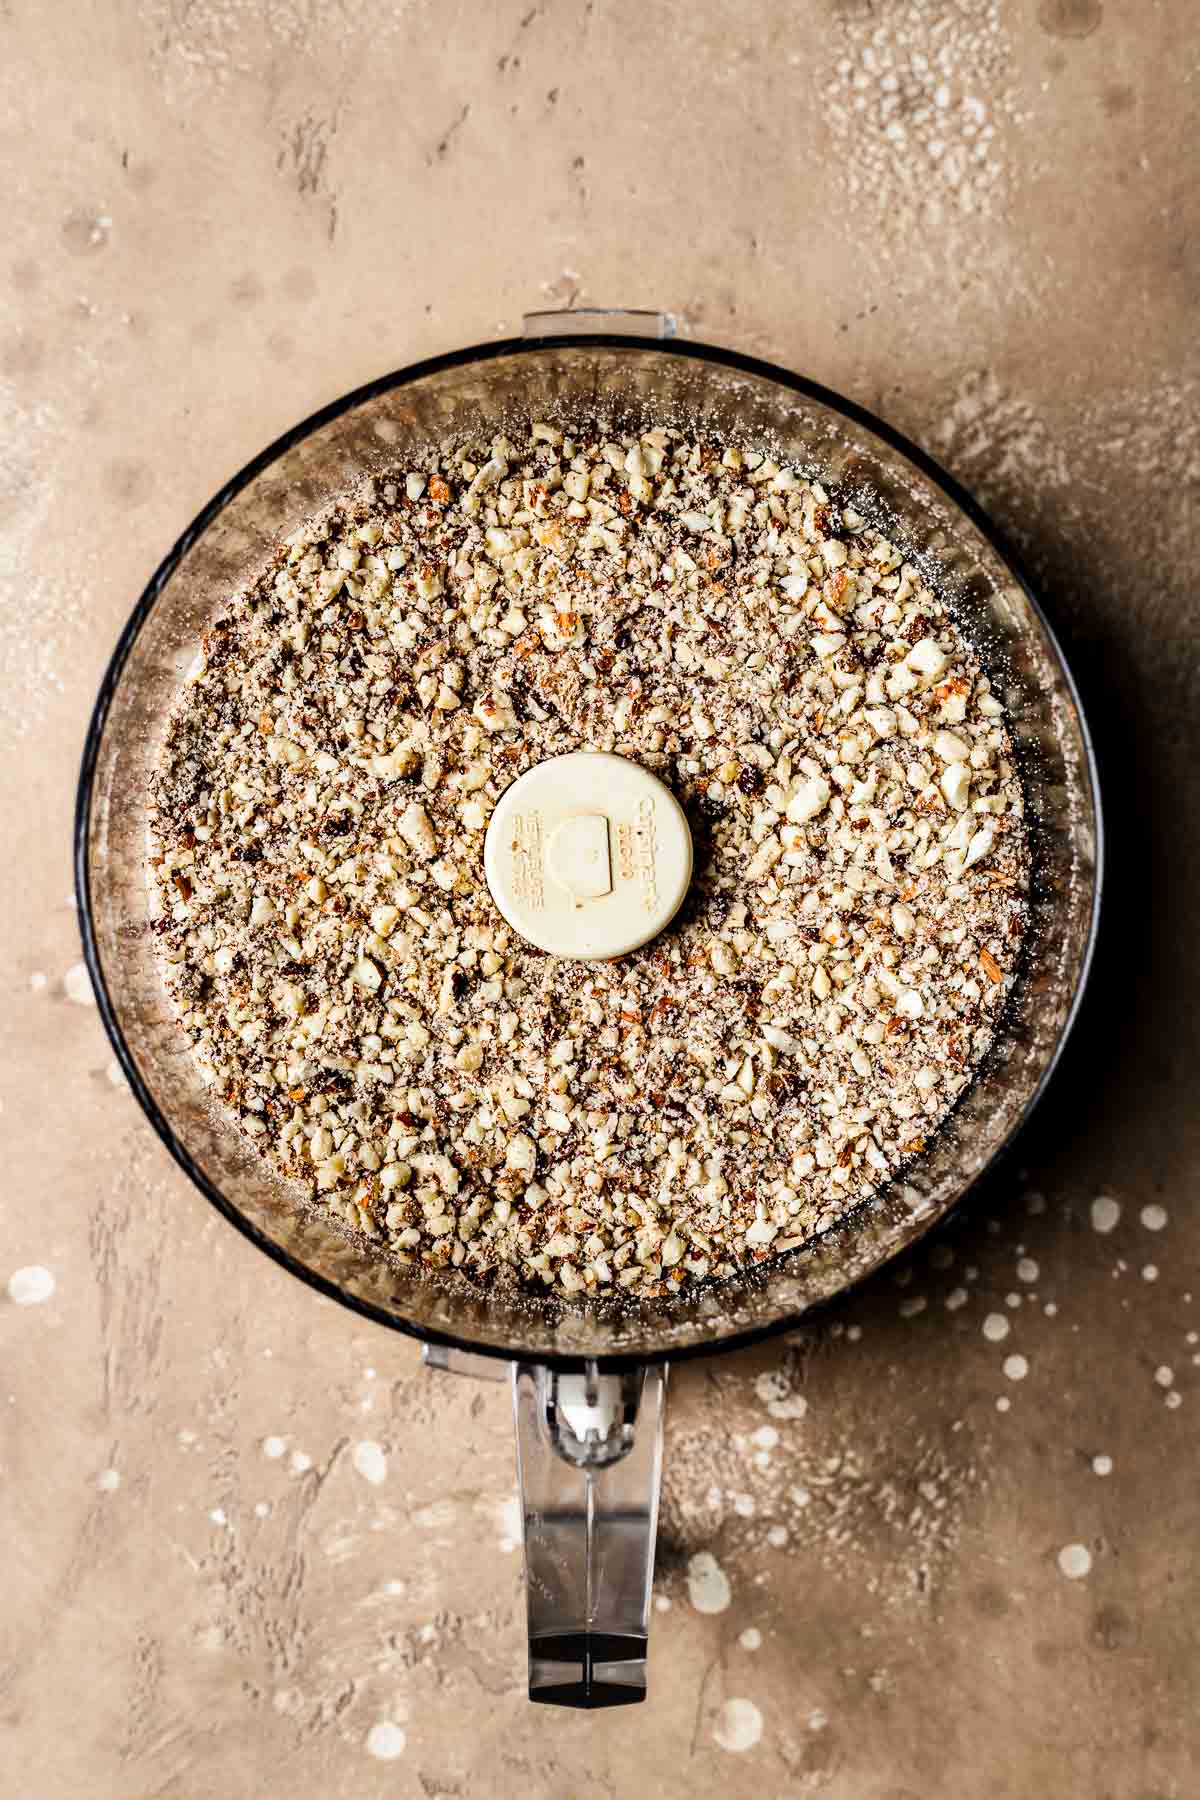 A food processor bowl with finely chopped almonds and hazelnuts.